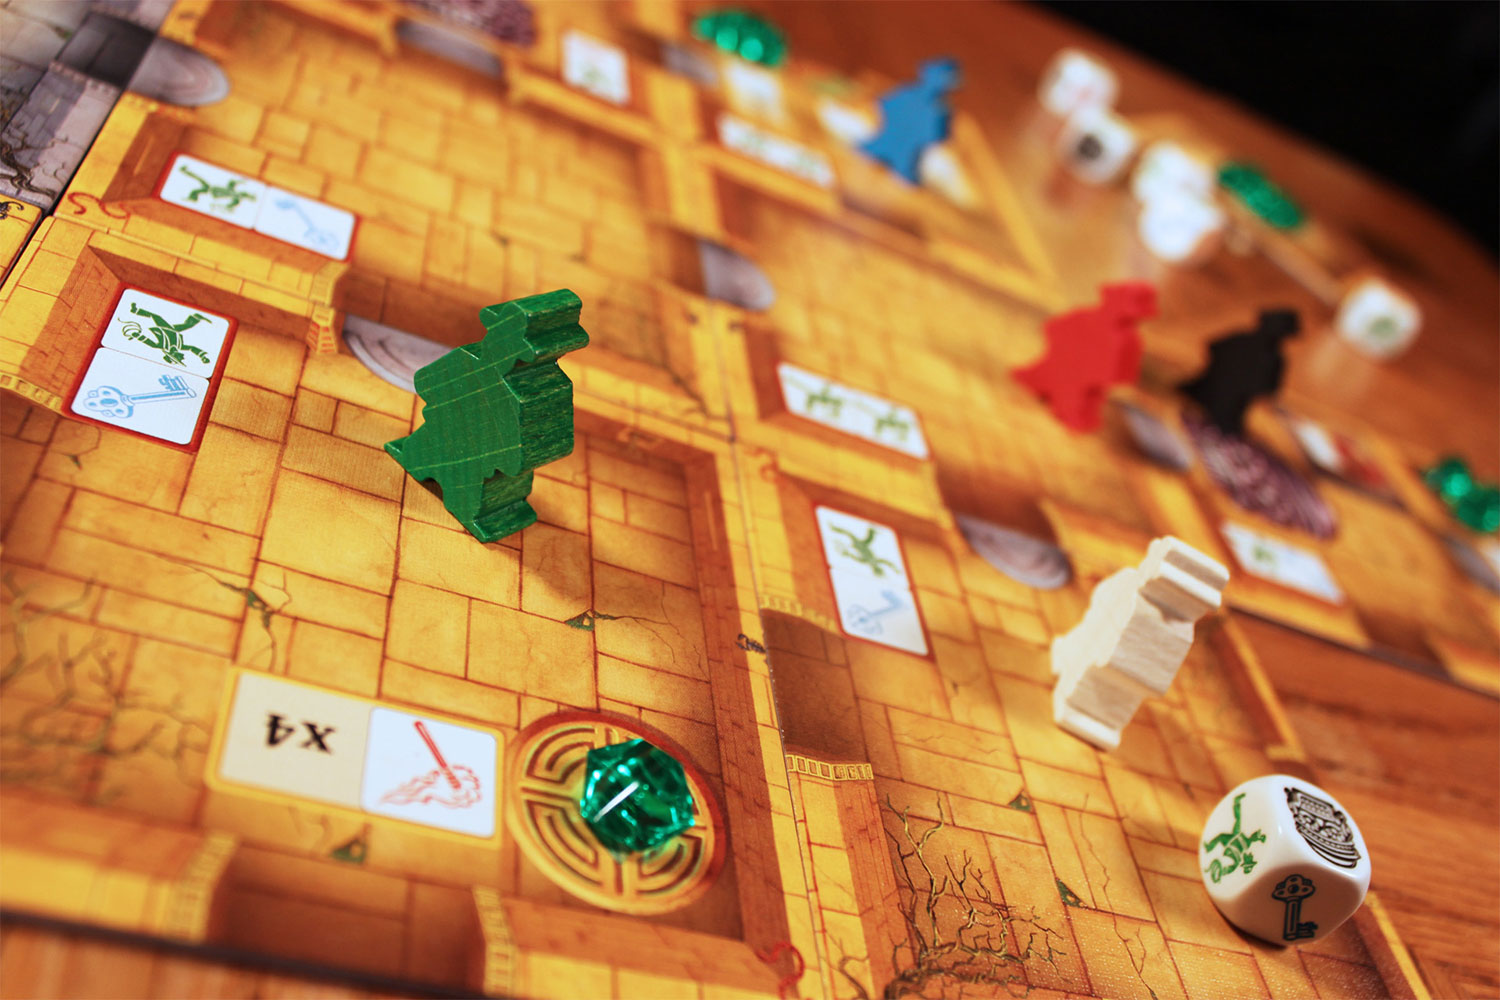 5 digital board games for PC, mobile, and console to play together